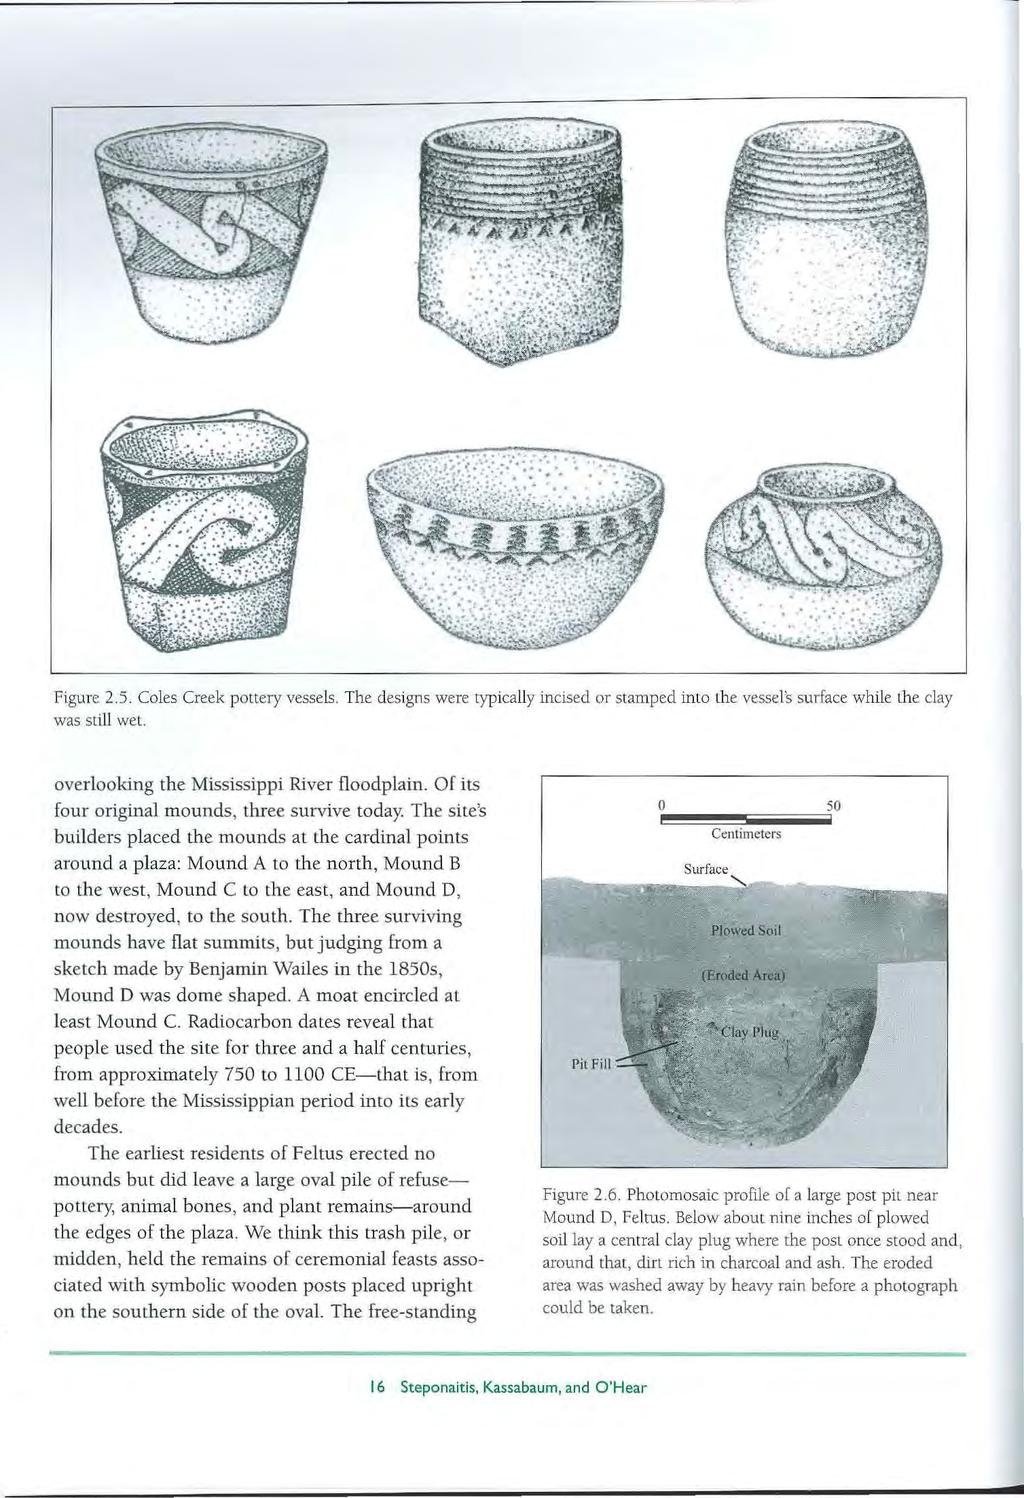 Figure 2.5. Coles Creek pottery vessels. The designs were typically incised or stamped into the vessels surface while the clay was still wet. overlooking the Mississippi River floodplain.